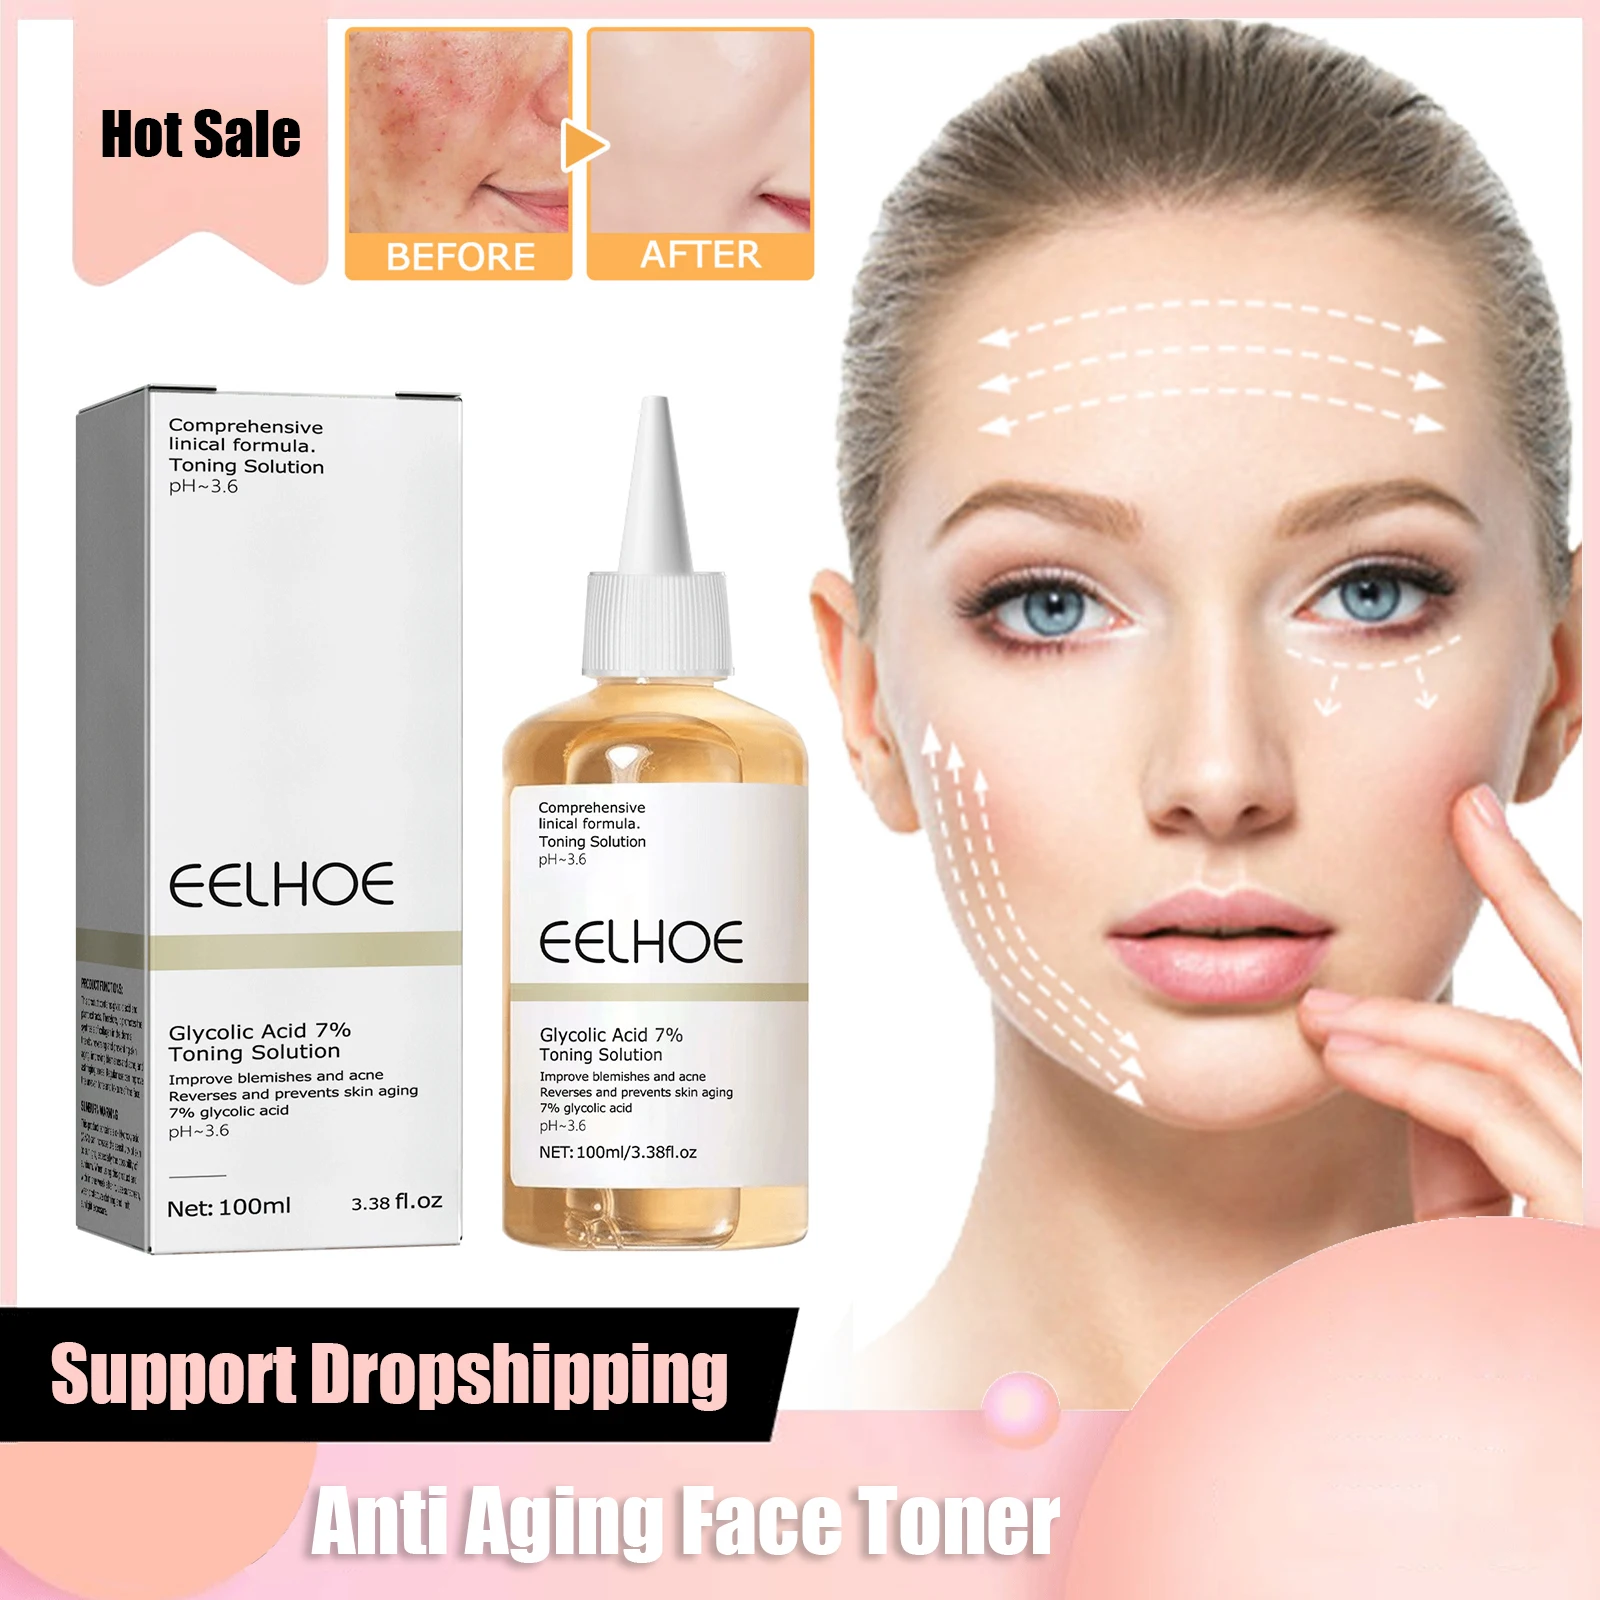 

Anti Aging Face Toner Glycolic Acid 7% Toning Solution Ordinary Acne Remover Lifting Firming Wrinkles Glowing Facial Skin Care